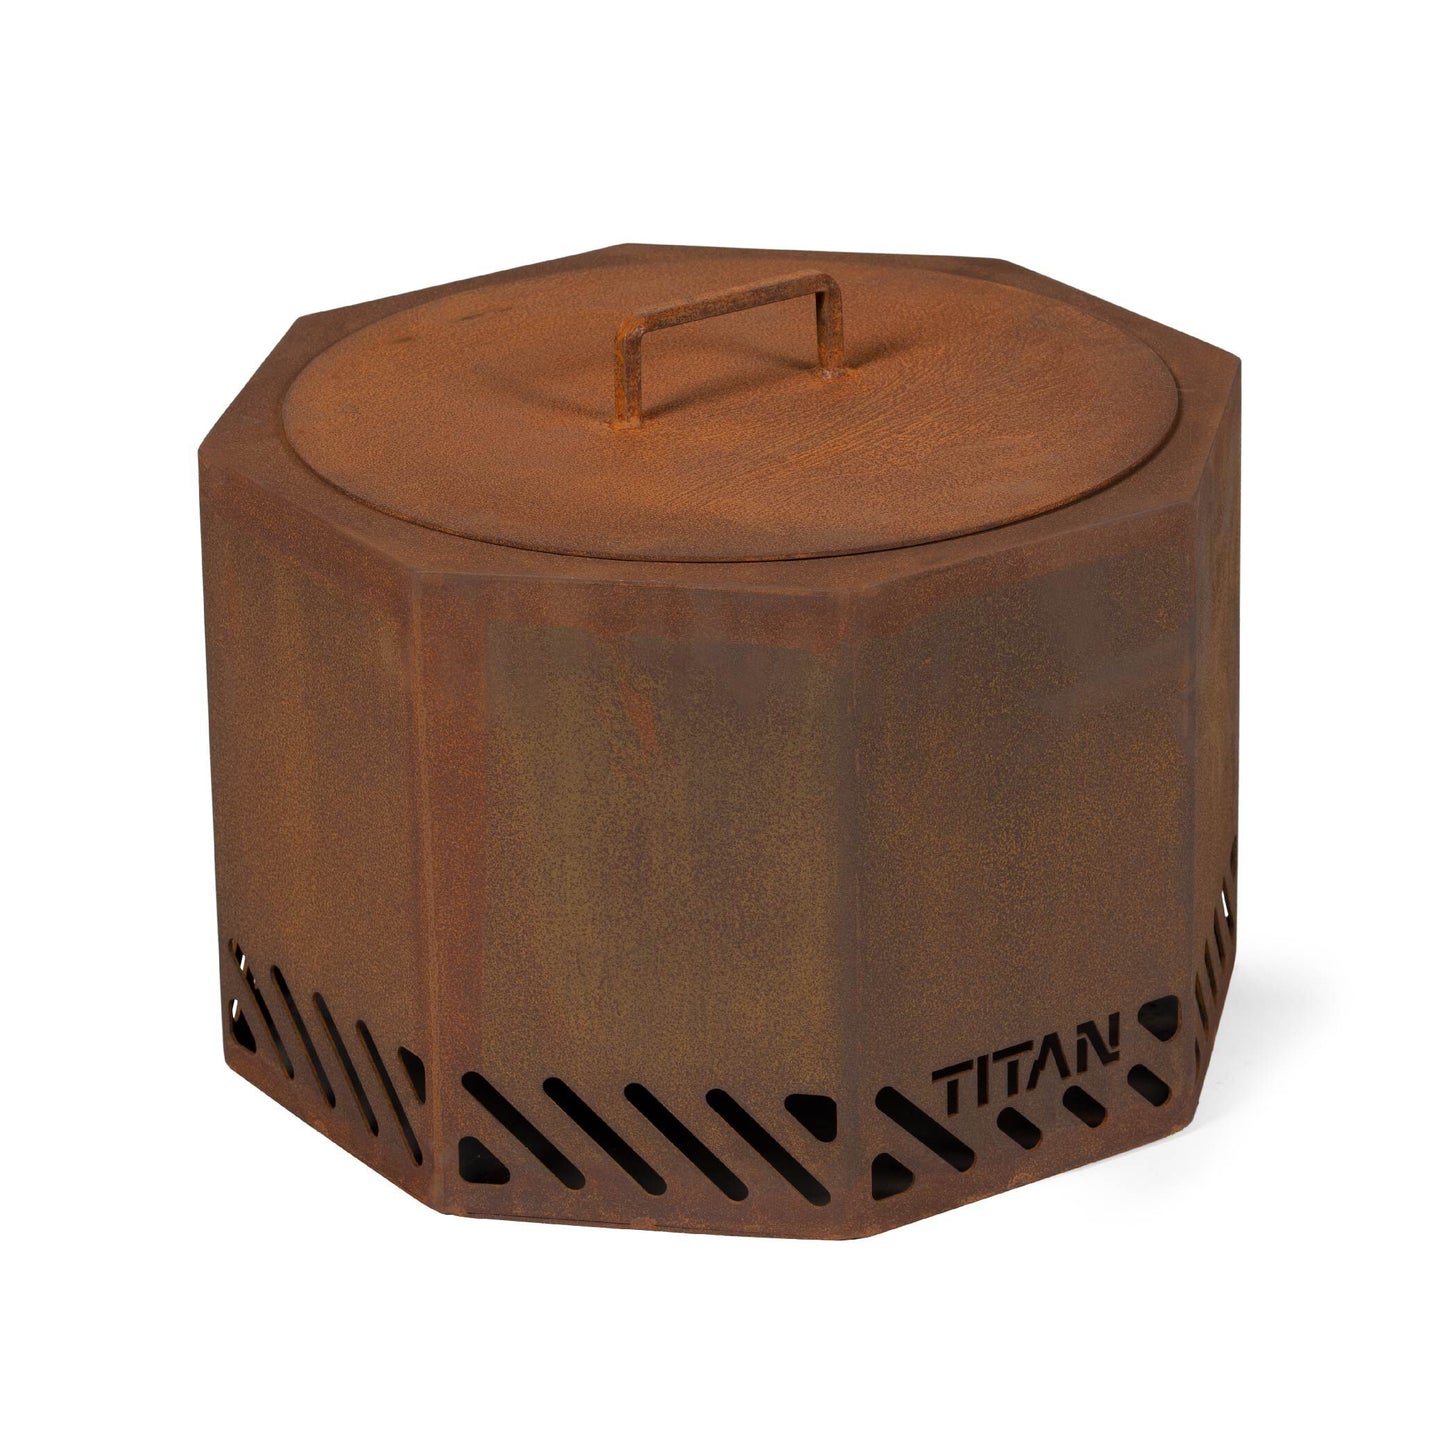 Corten Steel Dual Flame Smokeless Fire Pit with Lid - Fire Pit Size: 21" Diameter | 21" Diameter - view 1